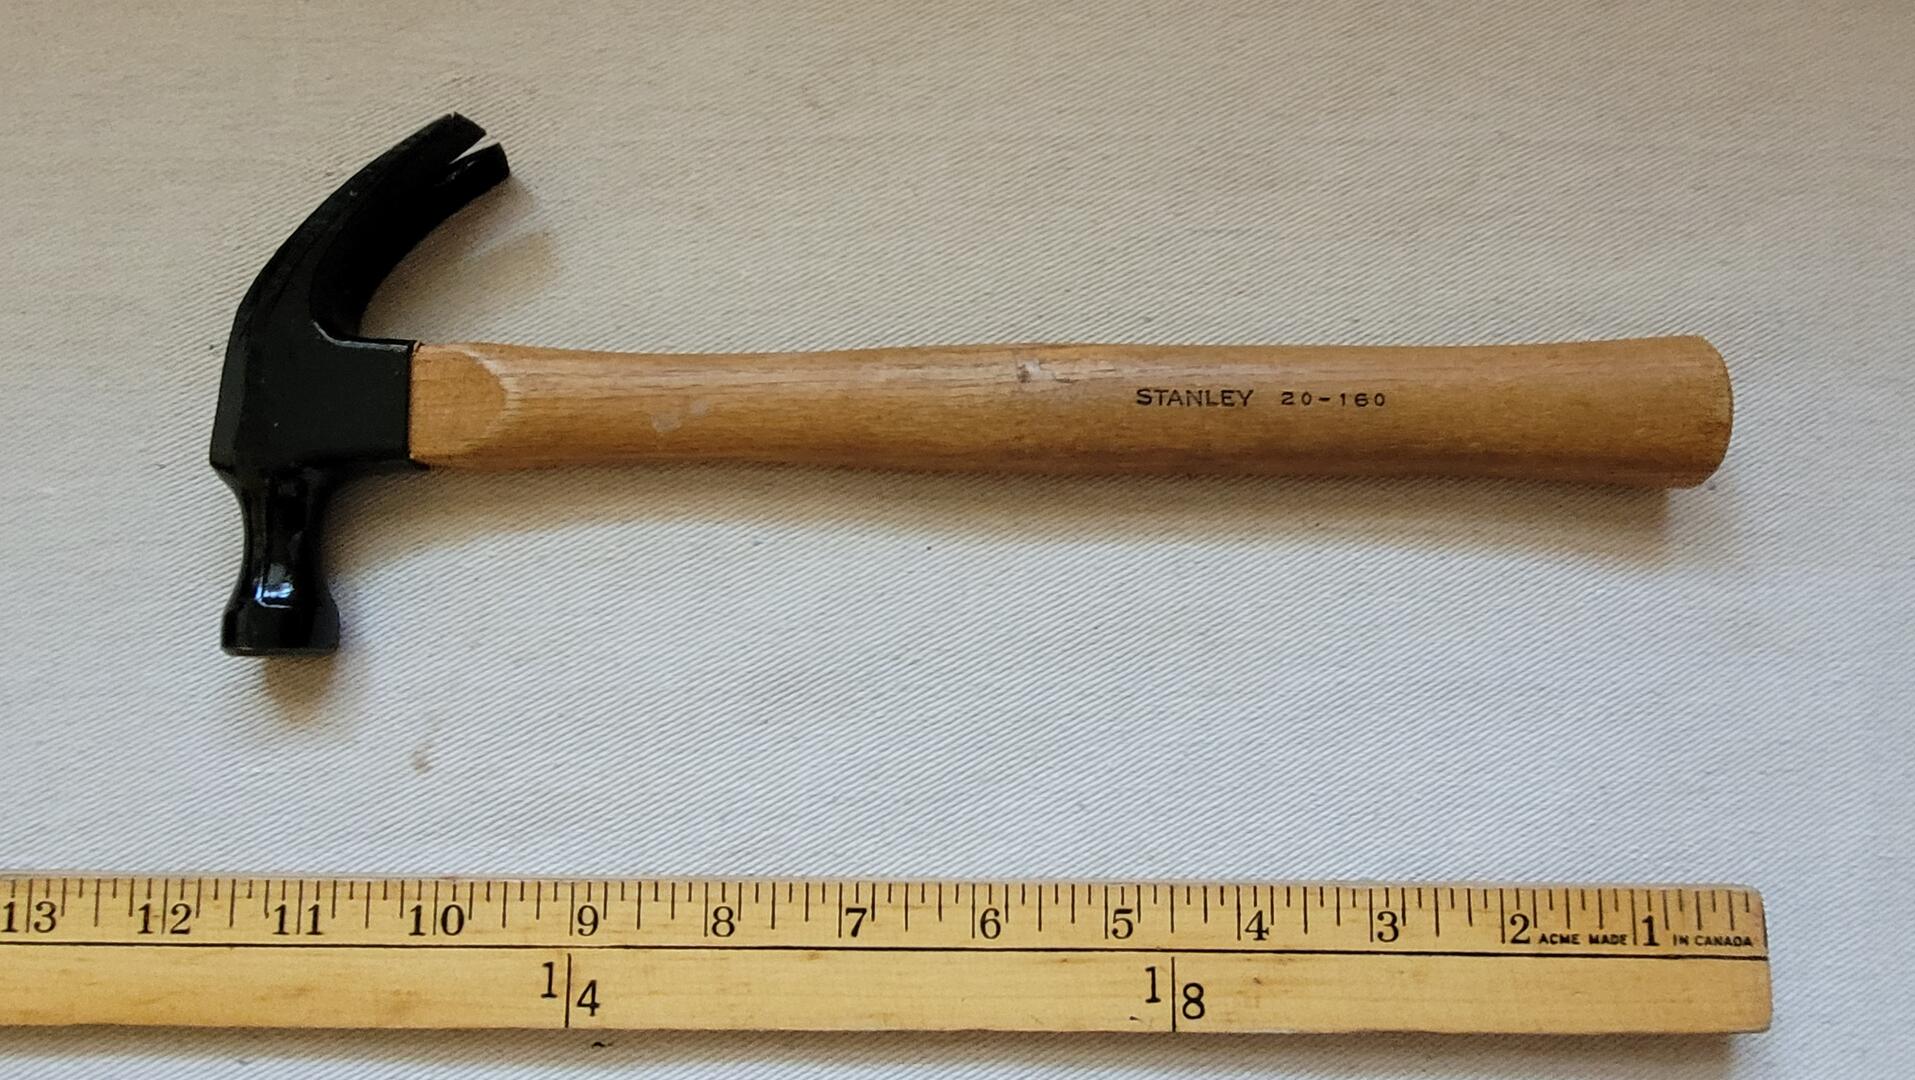 Vintage Stanley 20-160 Carpenter's Claw Hammer w Hickory Handle - antique collectible made in USA hand tools